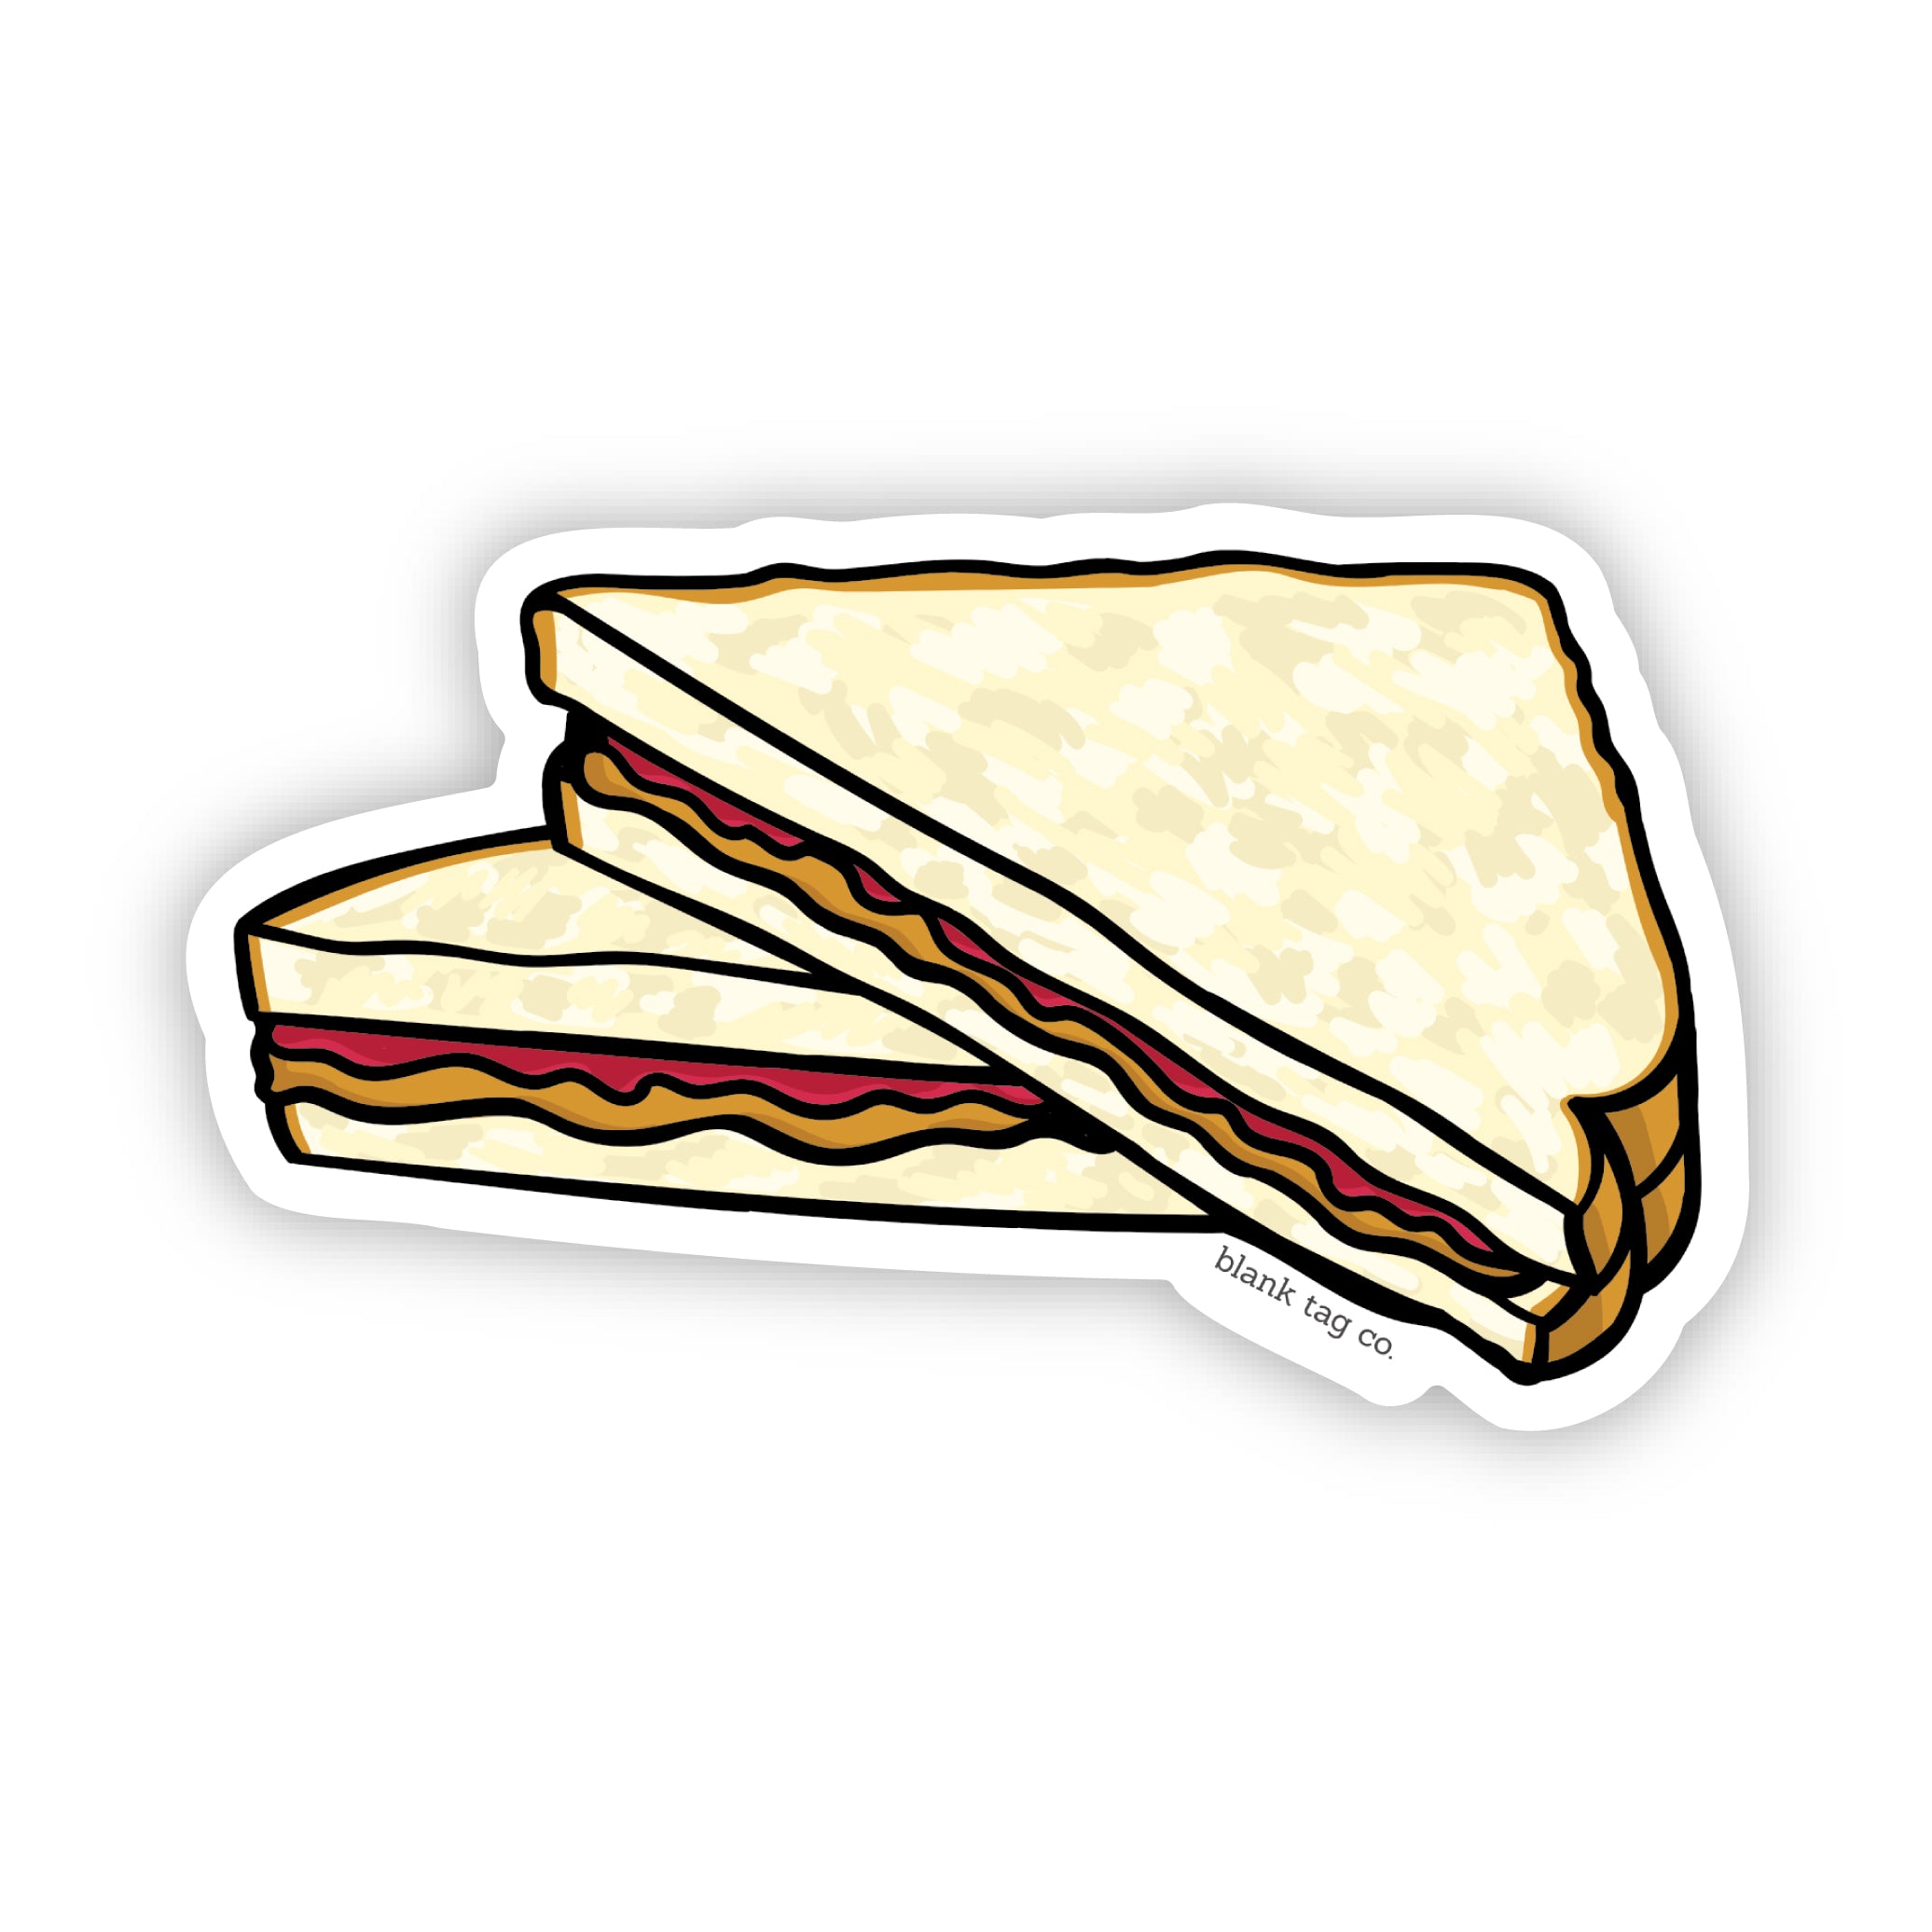 The Peanut Butter and Jelly Sticker